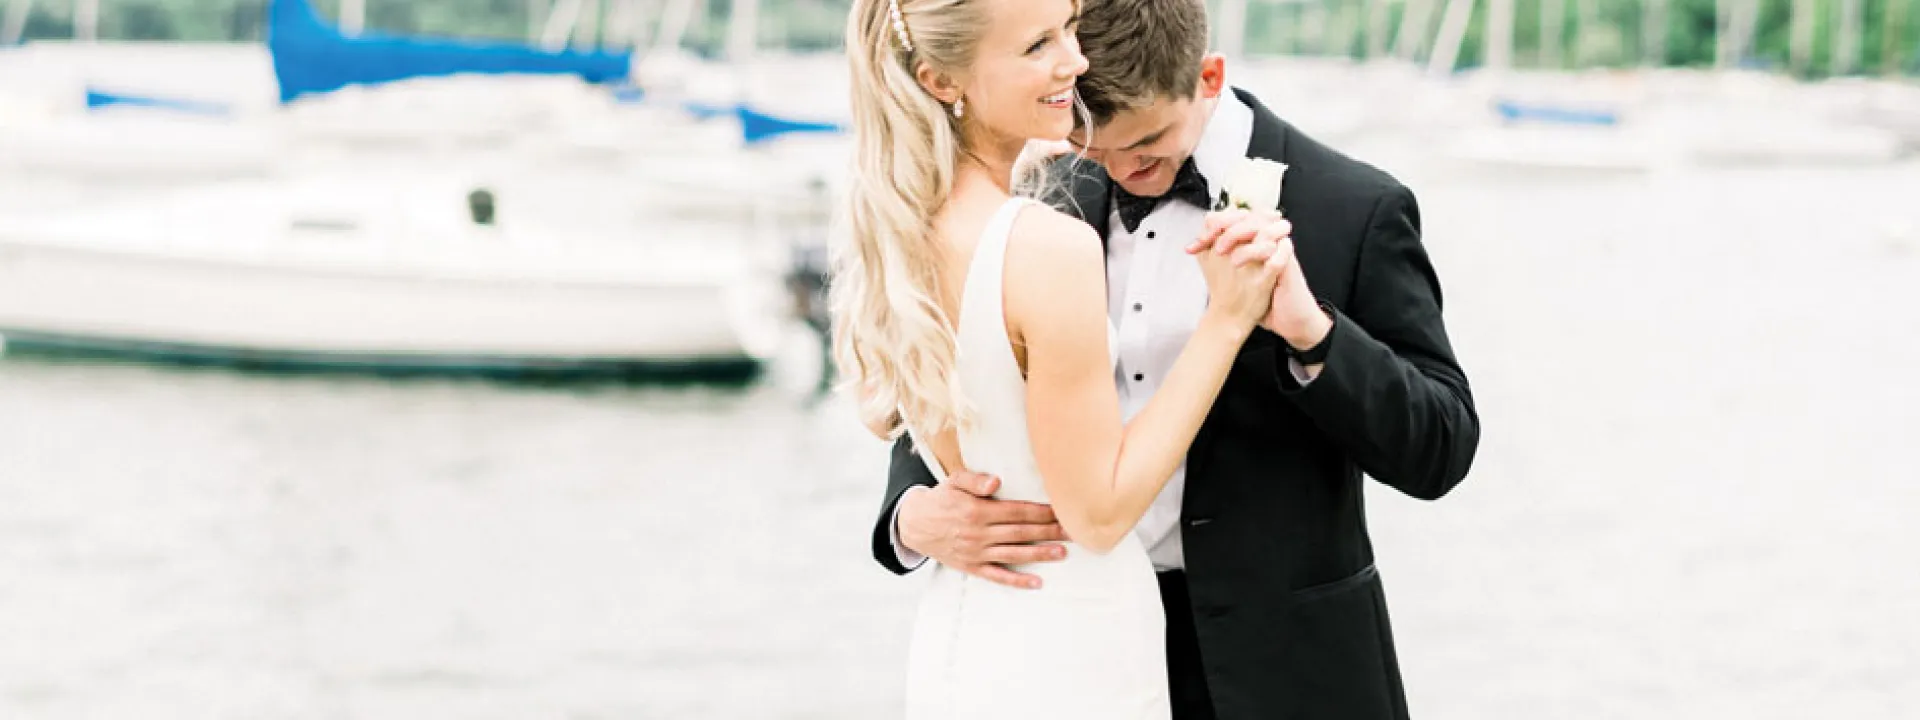 A bride and groom on a lake at their first dance.